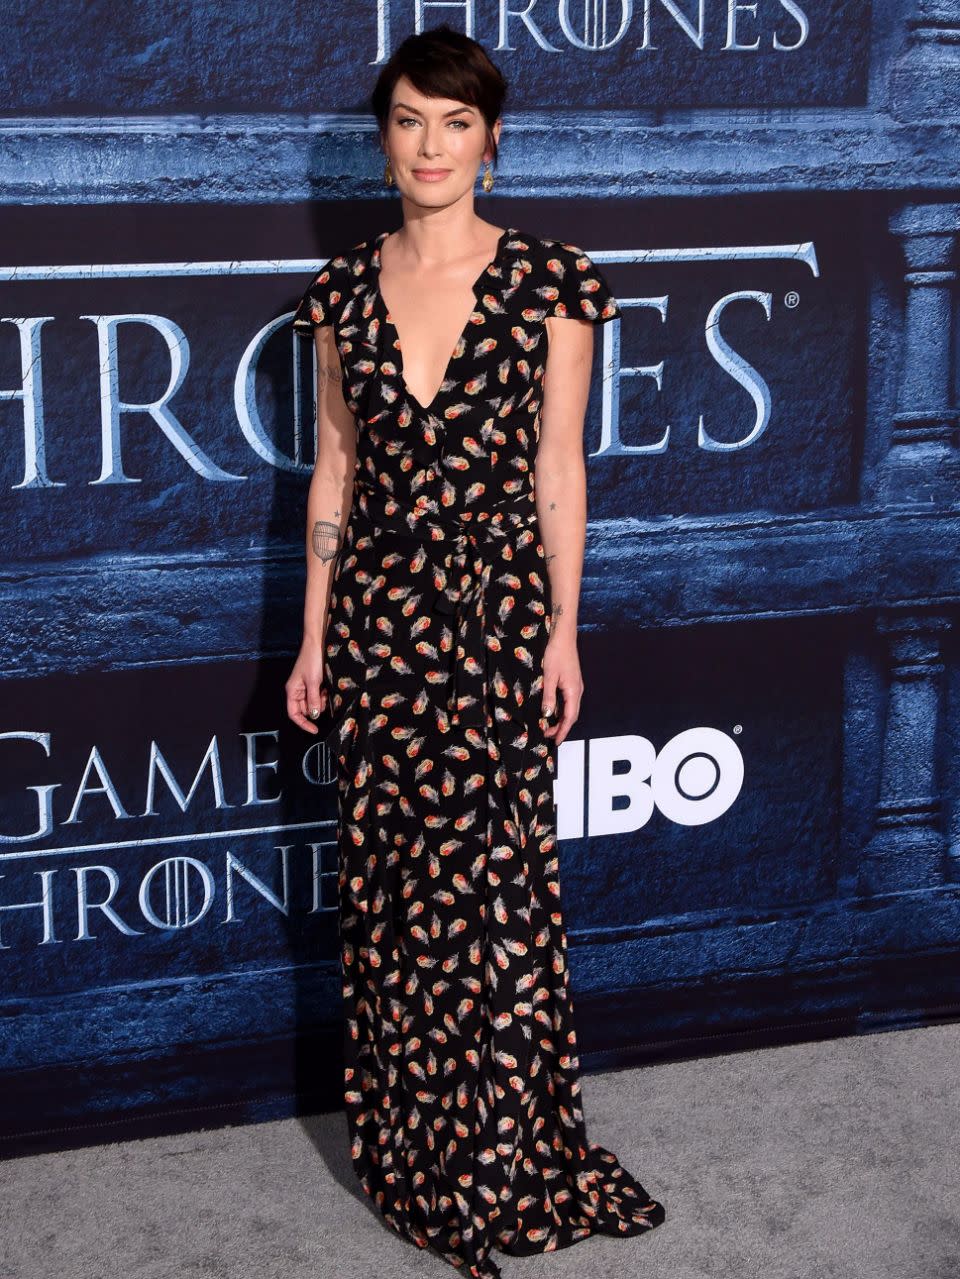 Lena was talking to Time magazine about her character, Queen Cersei Lannister. Source: Getty